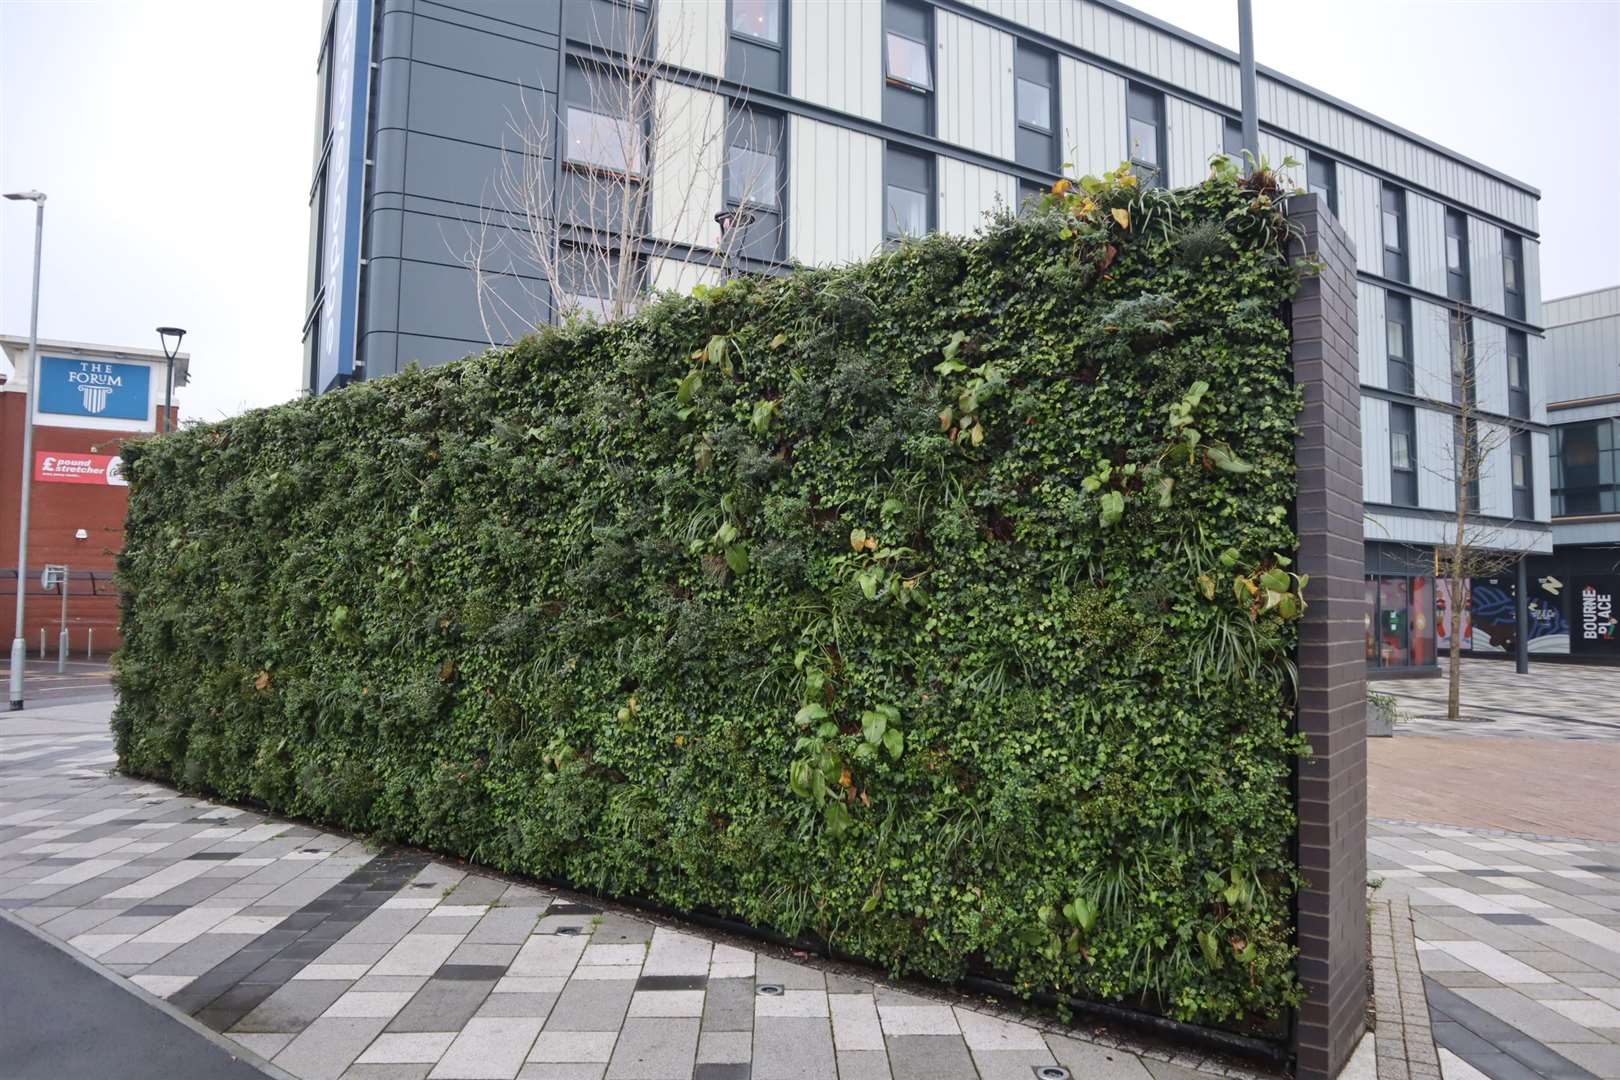 The 'growing wall' in front of Sittingbourne's Travelodge hotel. There would be more greenery as part of Swale council's Sittingbourne town centre revival plan